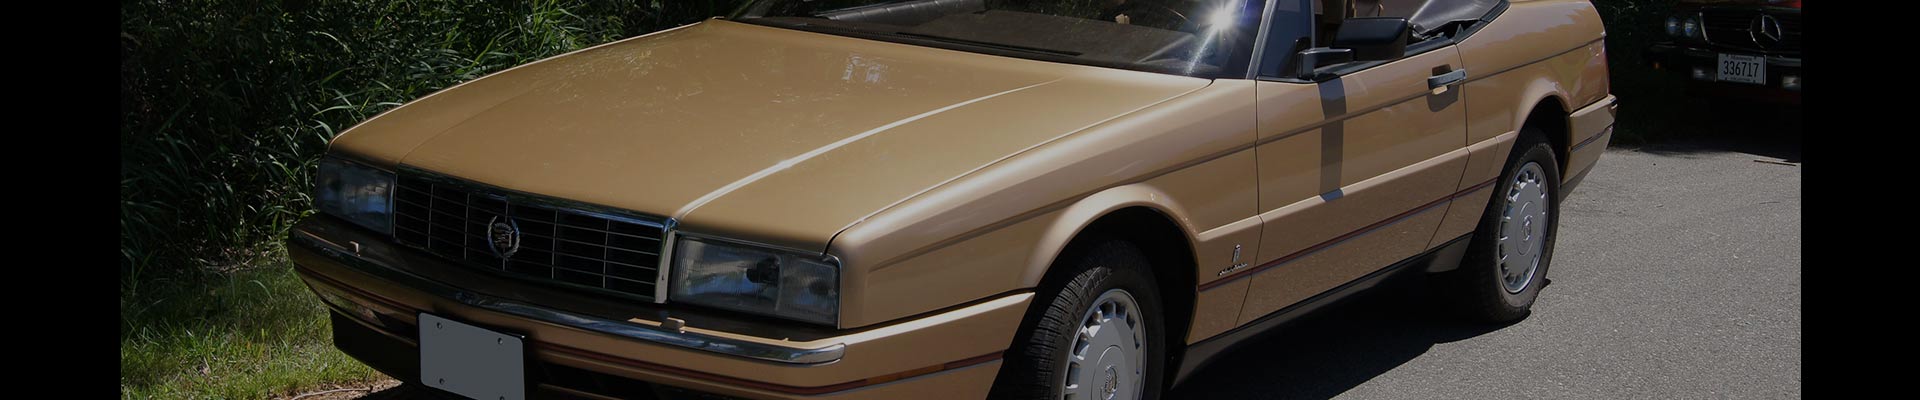 Shop Replacement and OEM 1987 Cadillac Allante Parts with Discounted Price on the Net